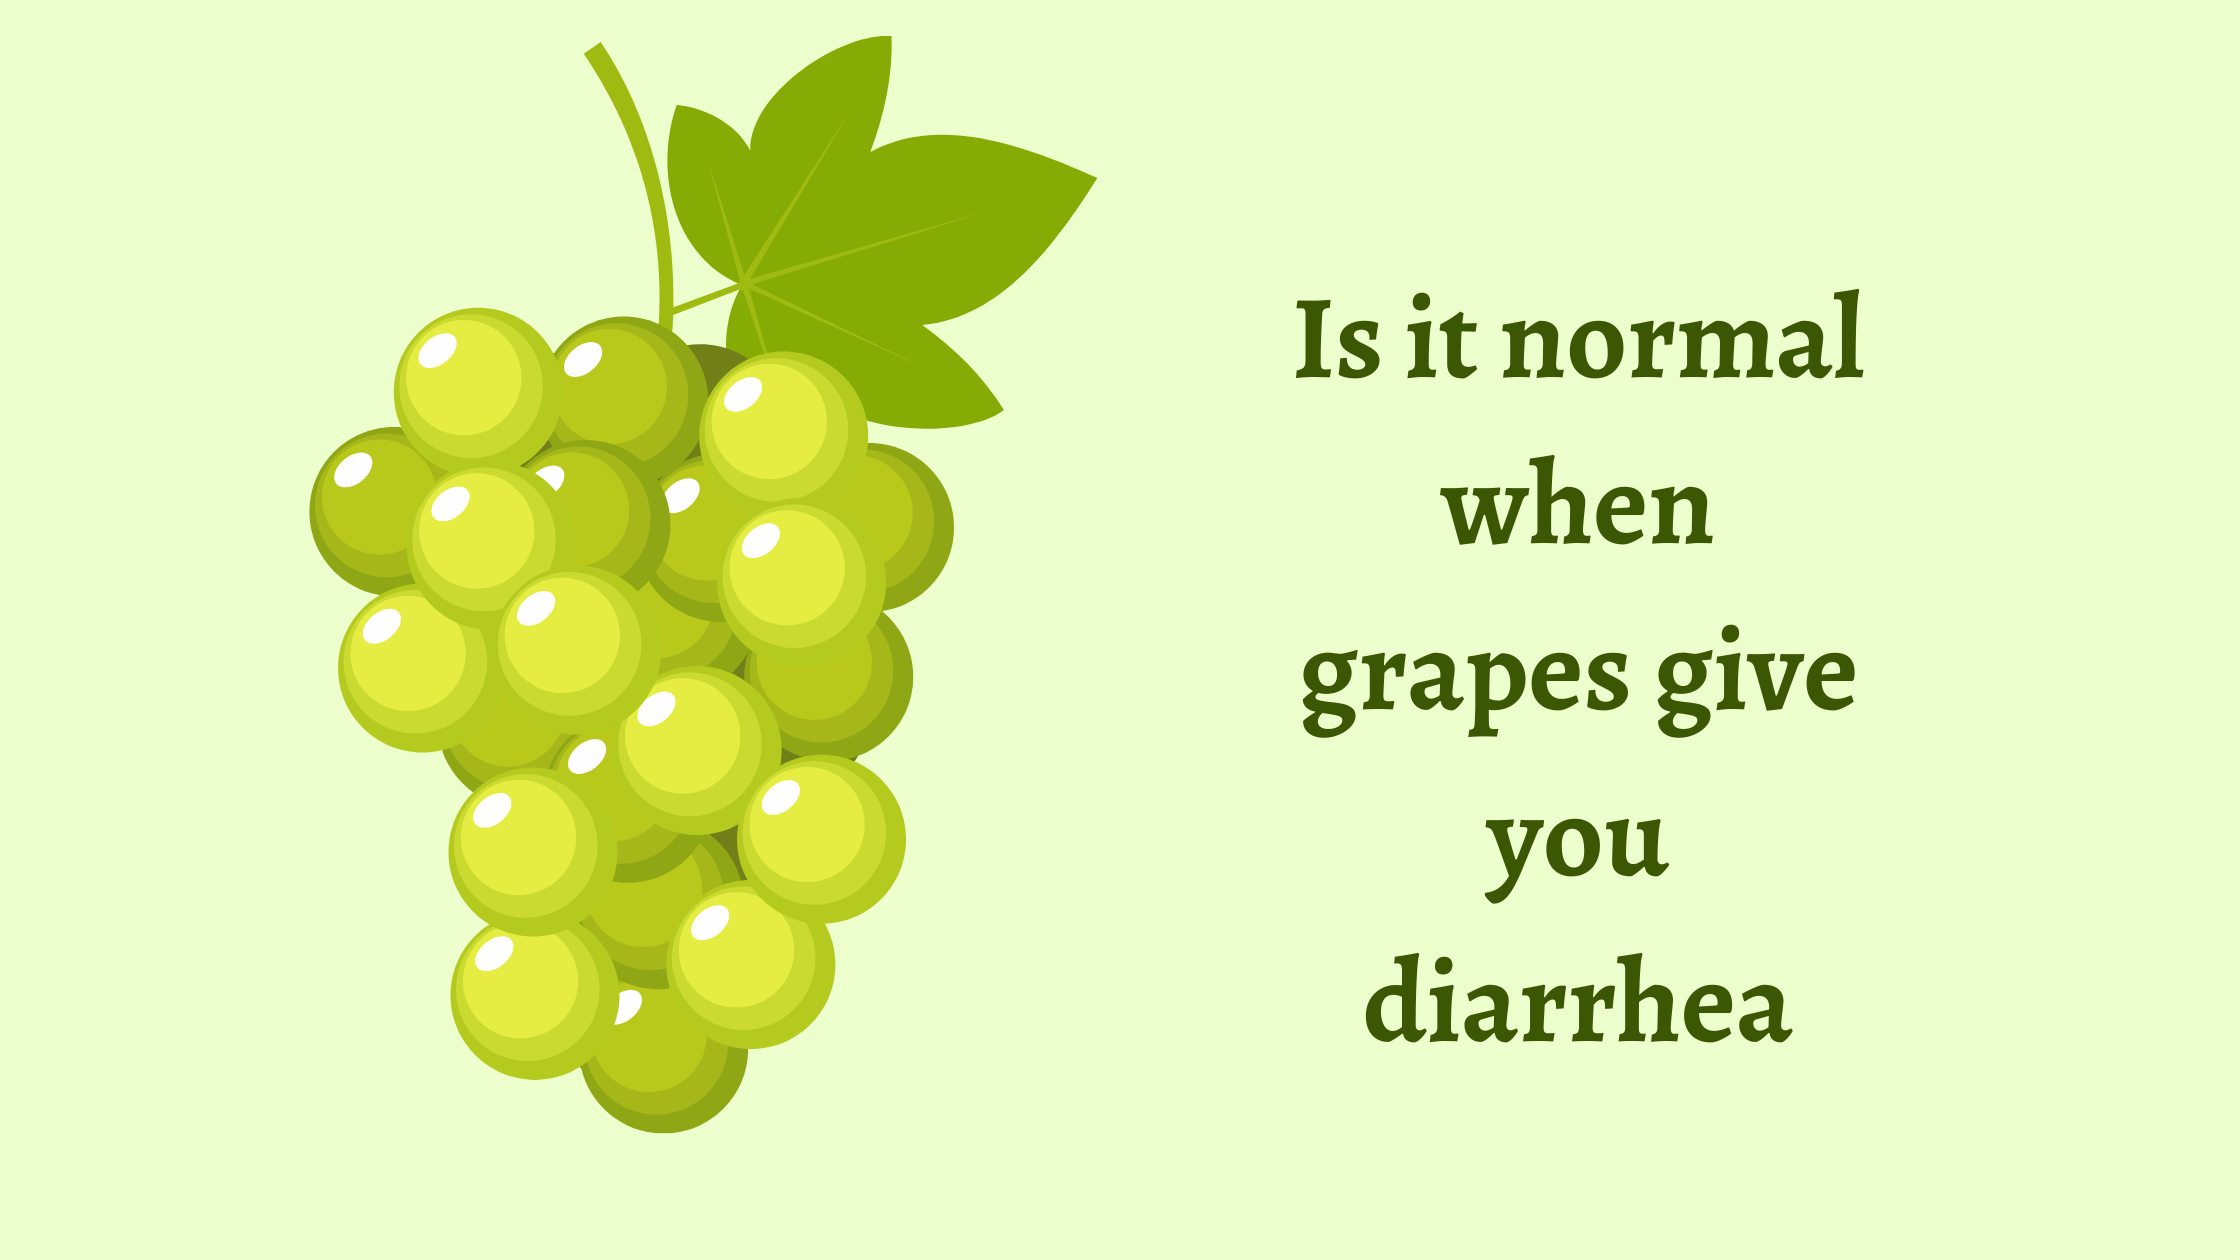 Is it normal when grapes give you diarrhea